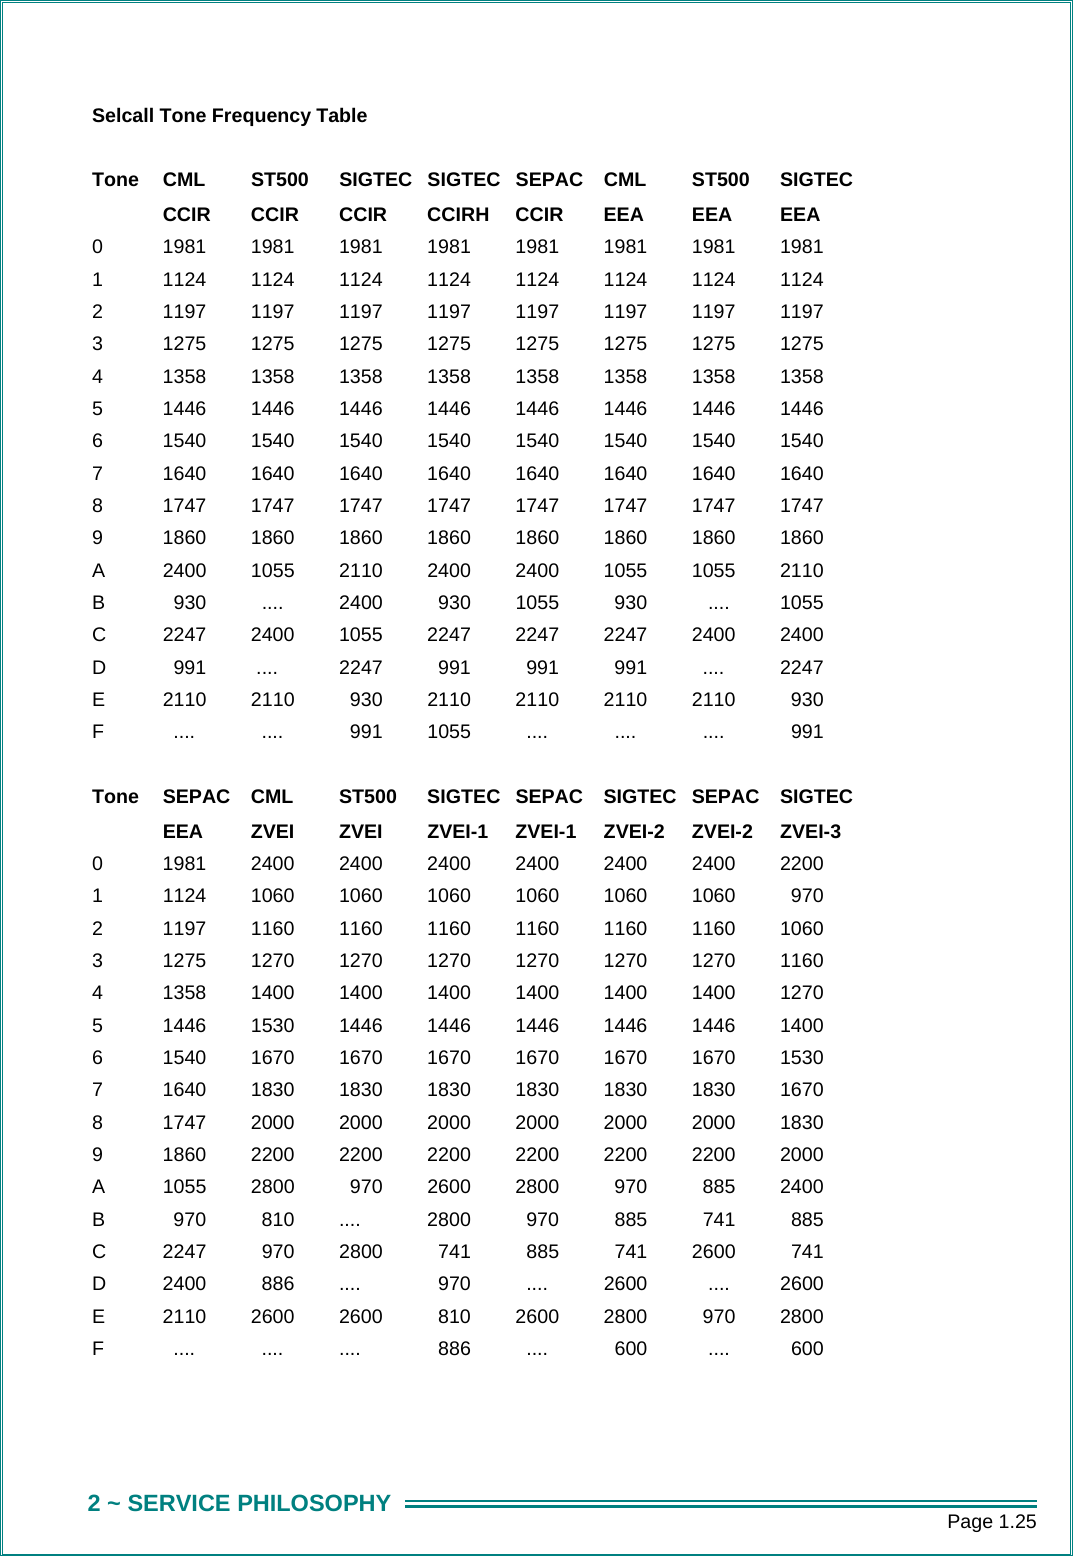      Page 1.25 2 ~ SERVICE PHILOSOPHY Selcall Tone Frequency Table  Tone  CML  ST500  SIGTEC SIGTEC SEPAC  CML  ST500  SIGTEC   CCIR  CCIR   CCIR   CCIRH   CCIR   EEA   EEA   EEA 0  1981 1981 1981 1981 1981 1981 1981 1981 1  1124 1124 1124 1124 1124 1124 1124 1124 2  1197 1197 1197 1197 1197 1197 1197 1197 3  1275 1275 1275 1275 1275 1275 1275 1275 4  1358 1358 1358 1358 1358 1358 1358 1358 5  1446 1446 1446 1446 1446 1446 1446 1446 6  1540 1540 1540 1540 1540 1540 1540 1540 7  1640 1640 1640 1640 1640 1640 1640 1640 8  1747 1747 1747 1747 1747 1747 1747 1747 9  1860 1860 1860 1860 1860 1860 1860 1860 A  2400 1055 2110 2400 2400 1055 1055 2110 B    930    ....  2400    930  1055    930     ....  1055 C  2247 2400 1055 2247 2247 2247 2400 2400 D    991   ....  2247    991    991    991    ....  2247 E  2110 2110   930 2110 2110 2110 2110   930 F    ....    ....    991  1055    ....    ....    ....    991  Tone SEPAC CML  ST500  SIGTEC SEPAC SIGTEC SEPAC SIGTEC  EEA ZVEI ZVEI  ZVEI-1  ZVEI-1  ZVEI-2  ZVEI-2  ZVEI-3 0  1981 2400 2400 2400 2400 2400 2400 2200 1  1124 1060 1060 1060 1060 1060 1060   970 2  1197 1160 1160 1160 1160 1160 1160 1060 3  1275 1270 1270 1270 1270 1270 1270 1160 4  1358 1400 1400 1400 1400 1400 1400 1270 5  1446 1530 1446 1446 1446 1446 1446 1400 6  1540 1670 1670 1670 1670 1670 1670 1530 7  1640 1830 1830 1830 1830 1830 1830 1670 8  1747 2000 2000 2000 2000 2000 2000 1830 9  1860 2200 2200 2200 2200 2200 2200 2000 A  1055 2800   970 2600 2800   970   885 2400 B    970    810  ....  2800    970    885    741    885 C  2247    970  2800    741    885    741  2600    741 D  2400    886  ....    970    ....  2600     ....  2600 E  2110 2600 2600   810 2600 2800   970 2800 F    ....    ....  ....    886    ....    600     ....    600  